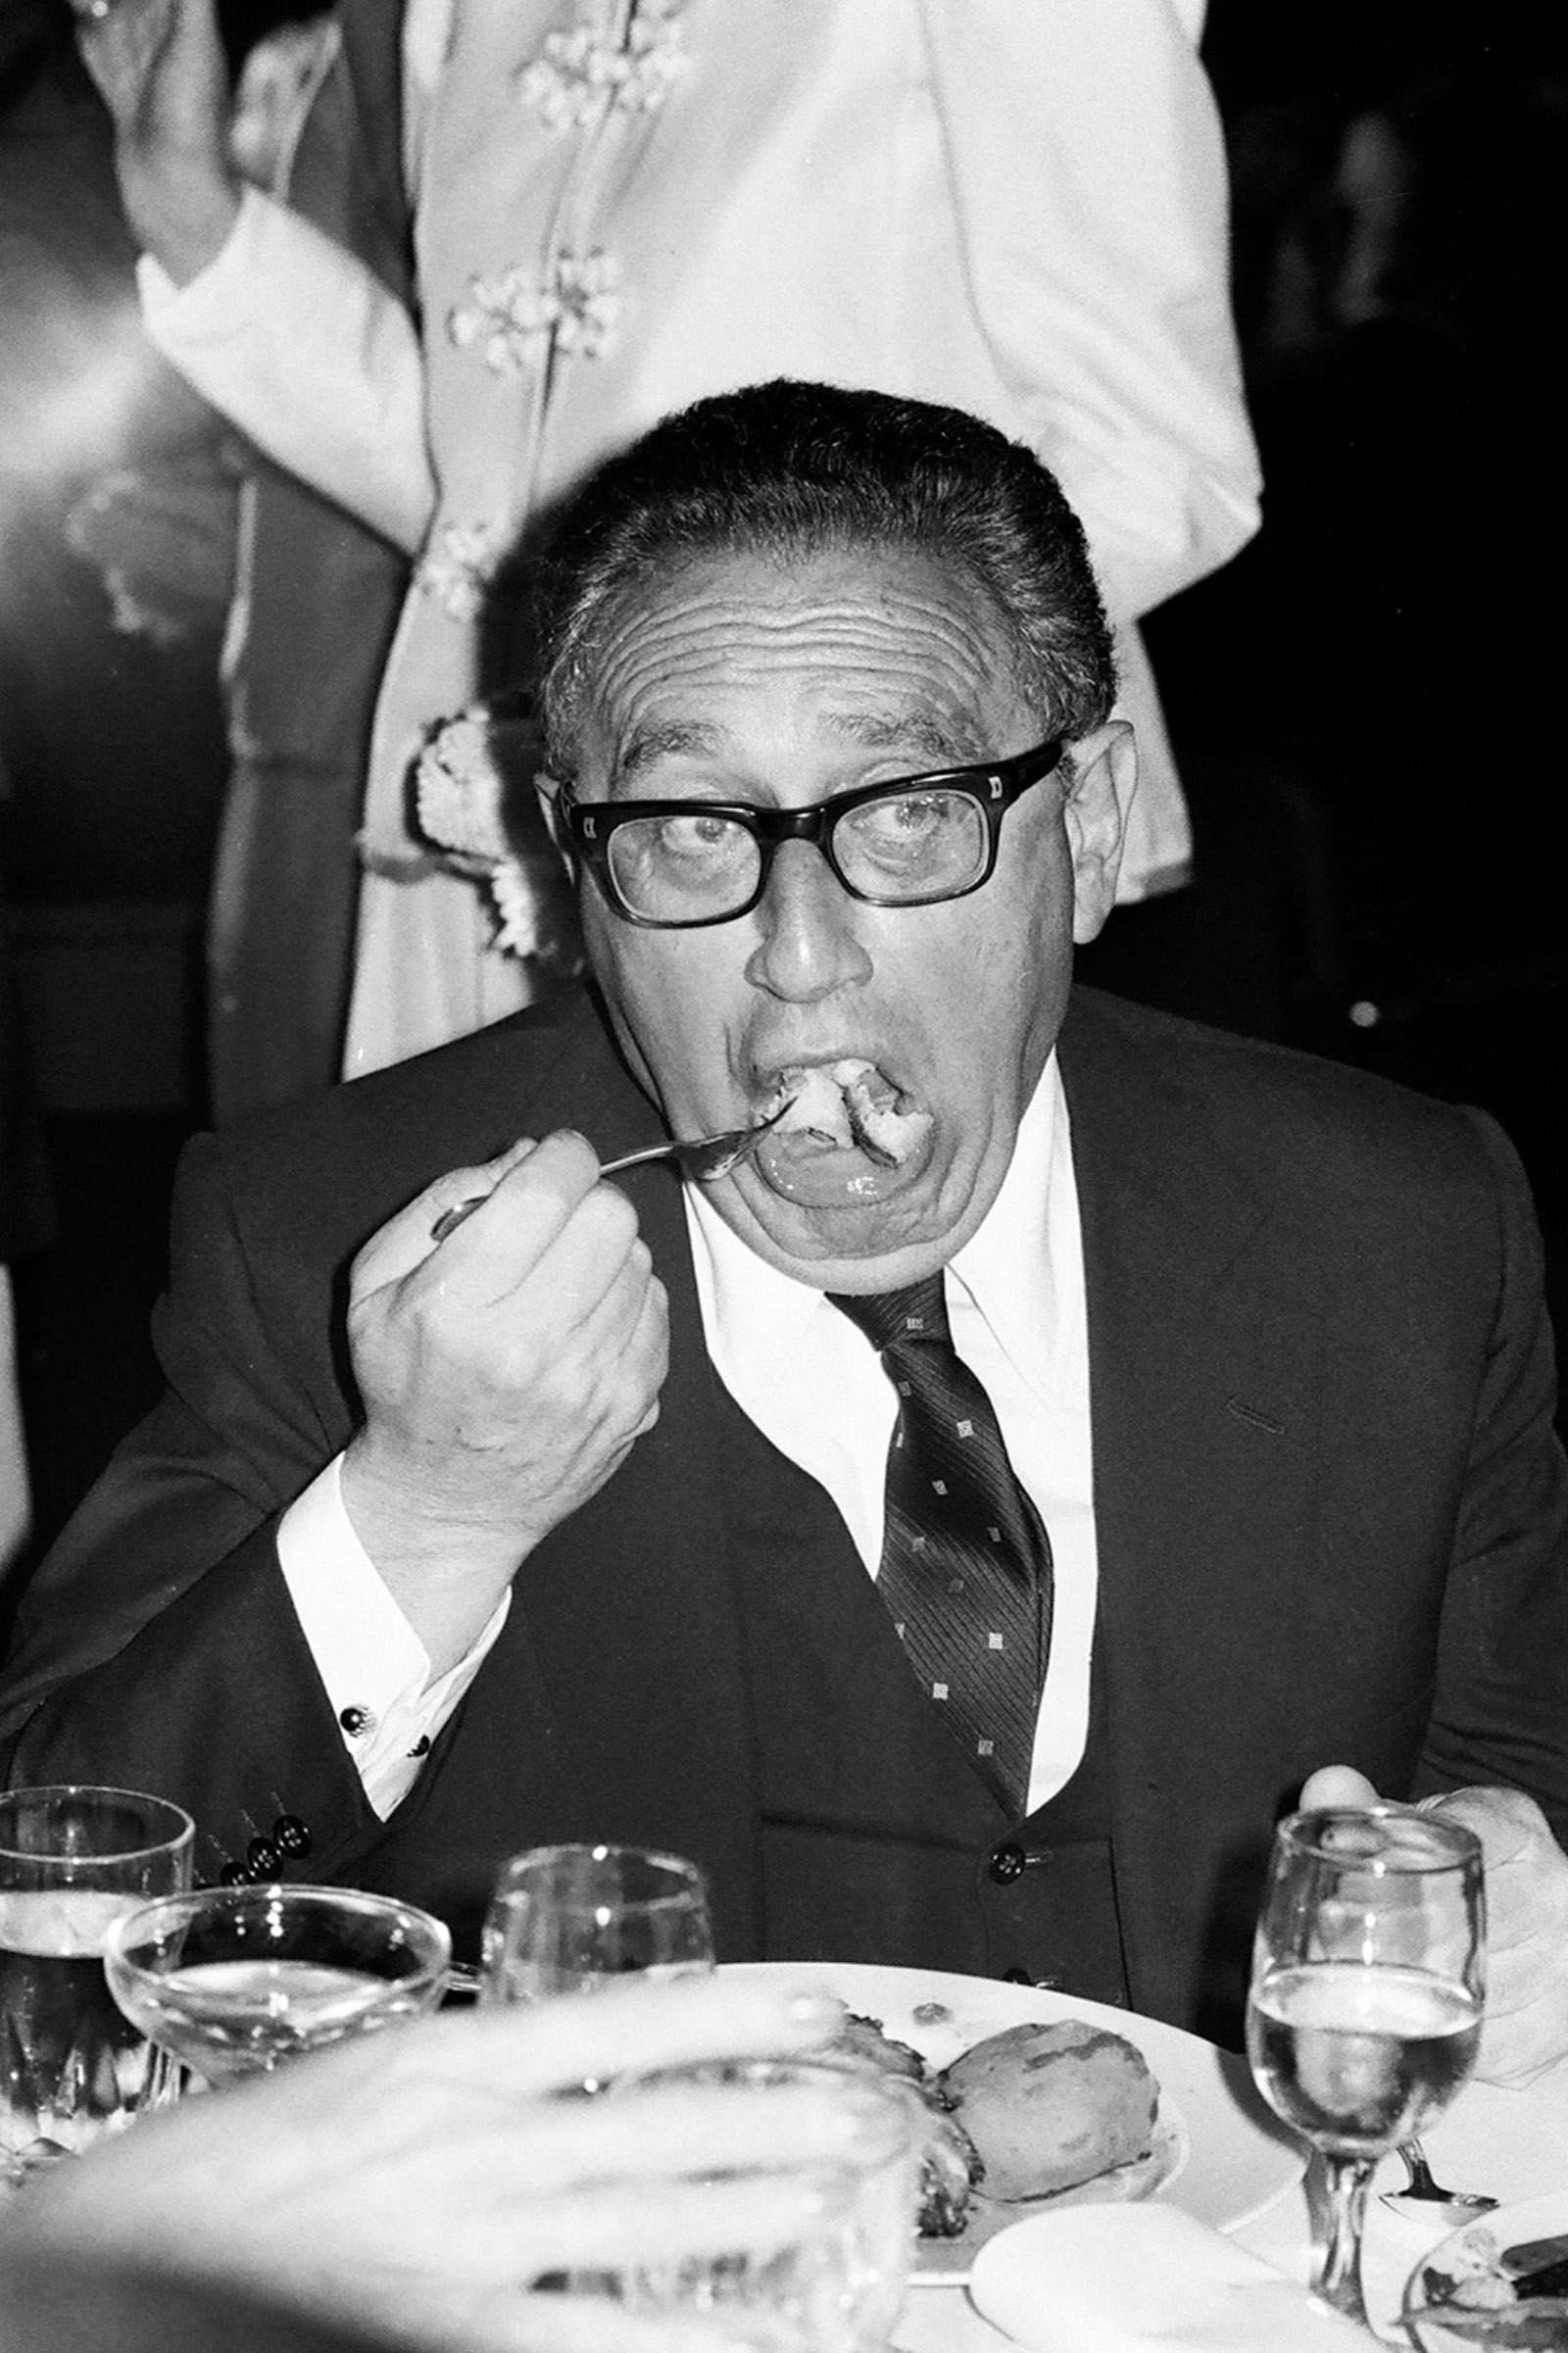 Photograph of Henry Kissinger eating at a table